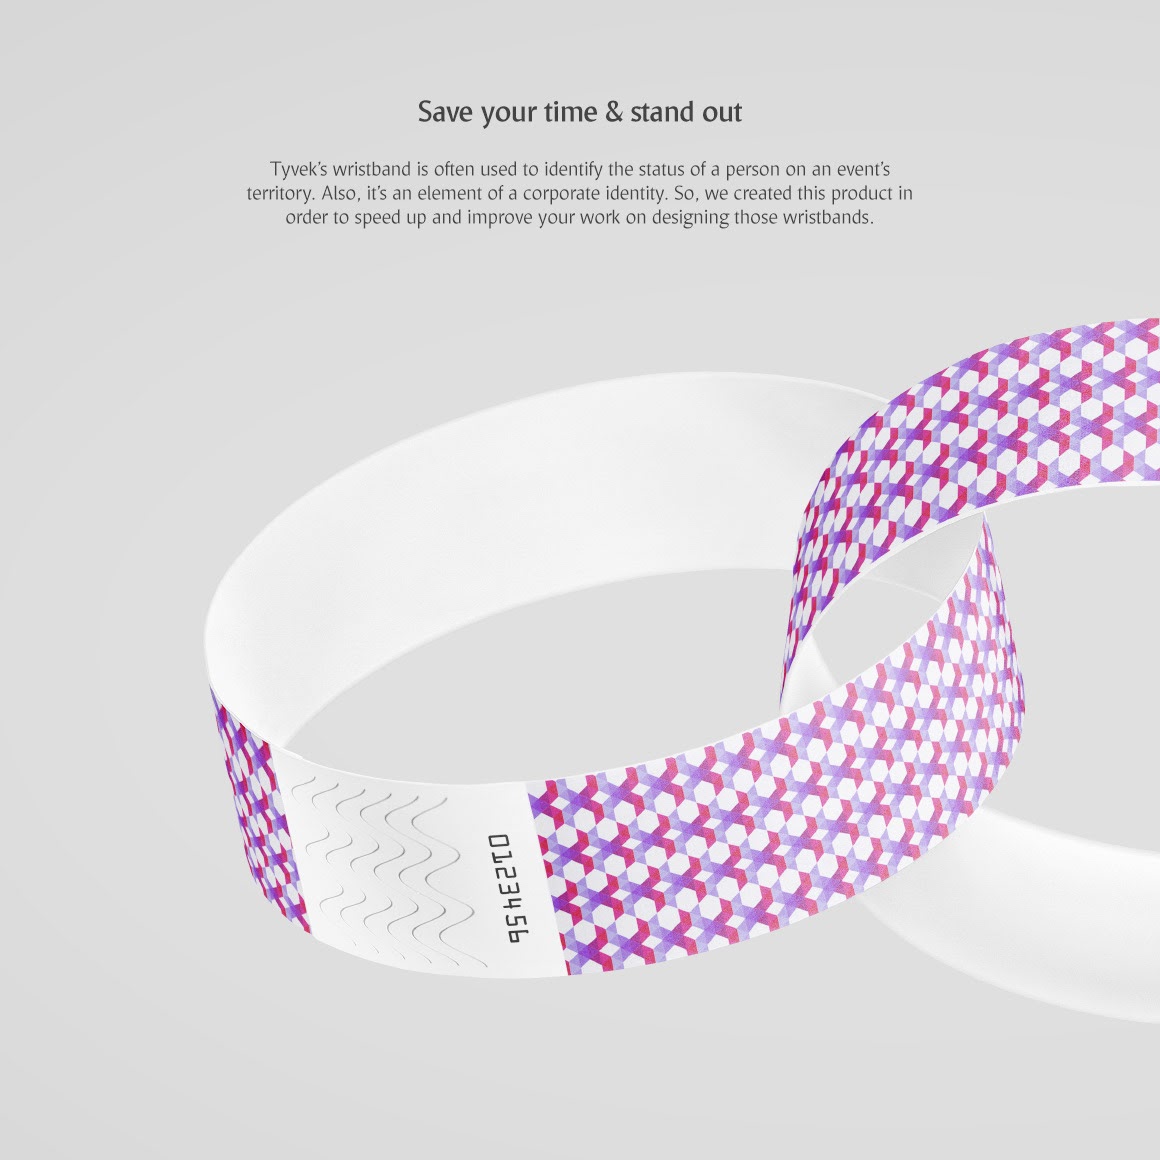 Download Wristband Mockup Psd Free Download - Free PSD Mockups Smart Object and Templates to create ...